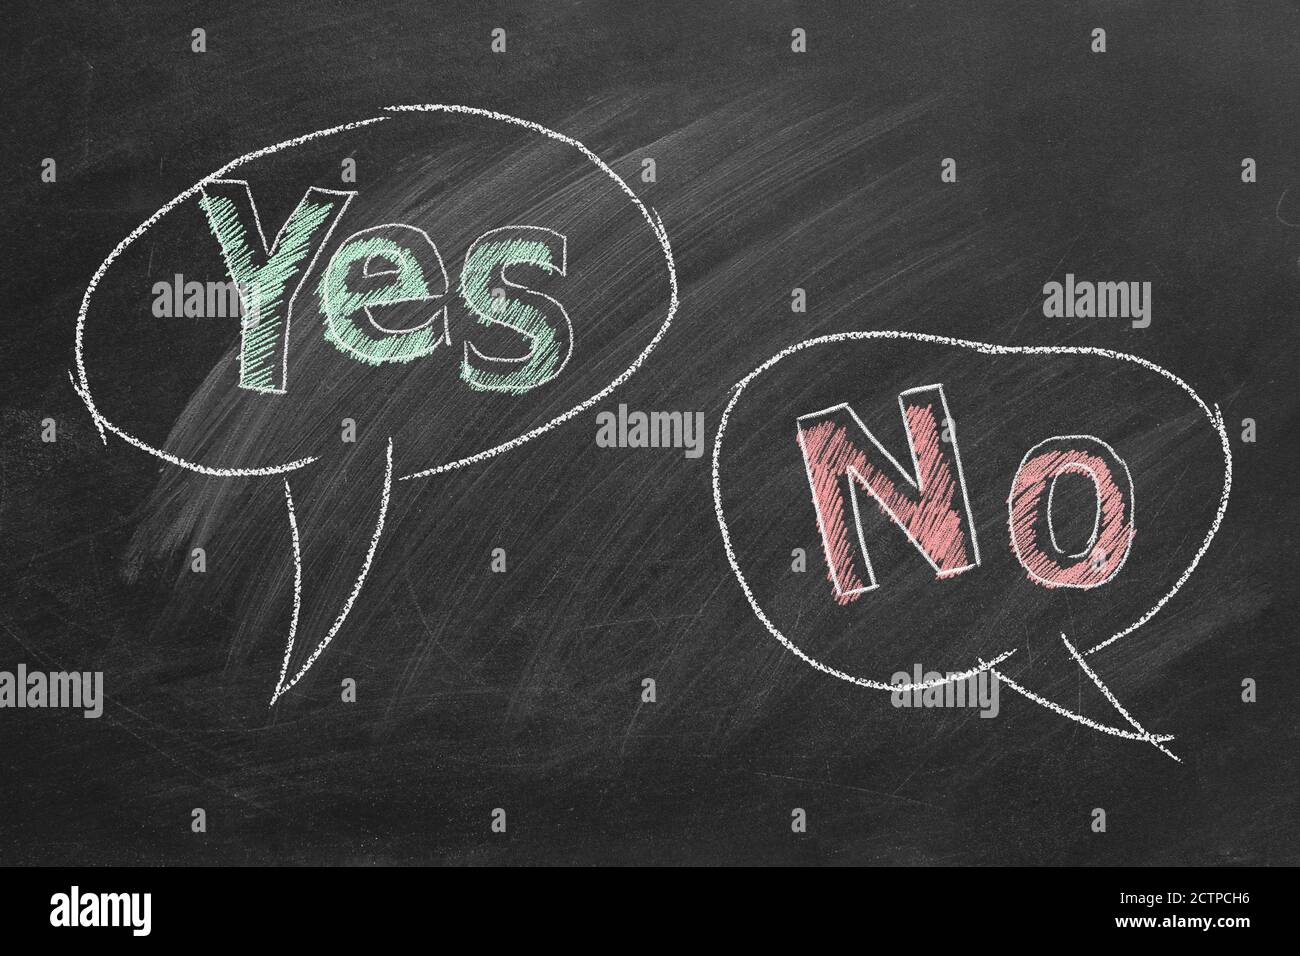 Speech bubbles with yes and no text written in chalk on a blackboard. Different points of view. Stock Photo